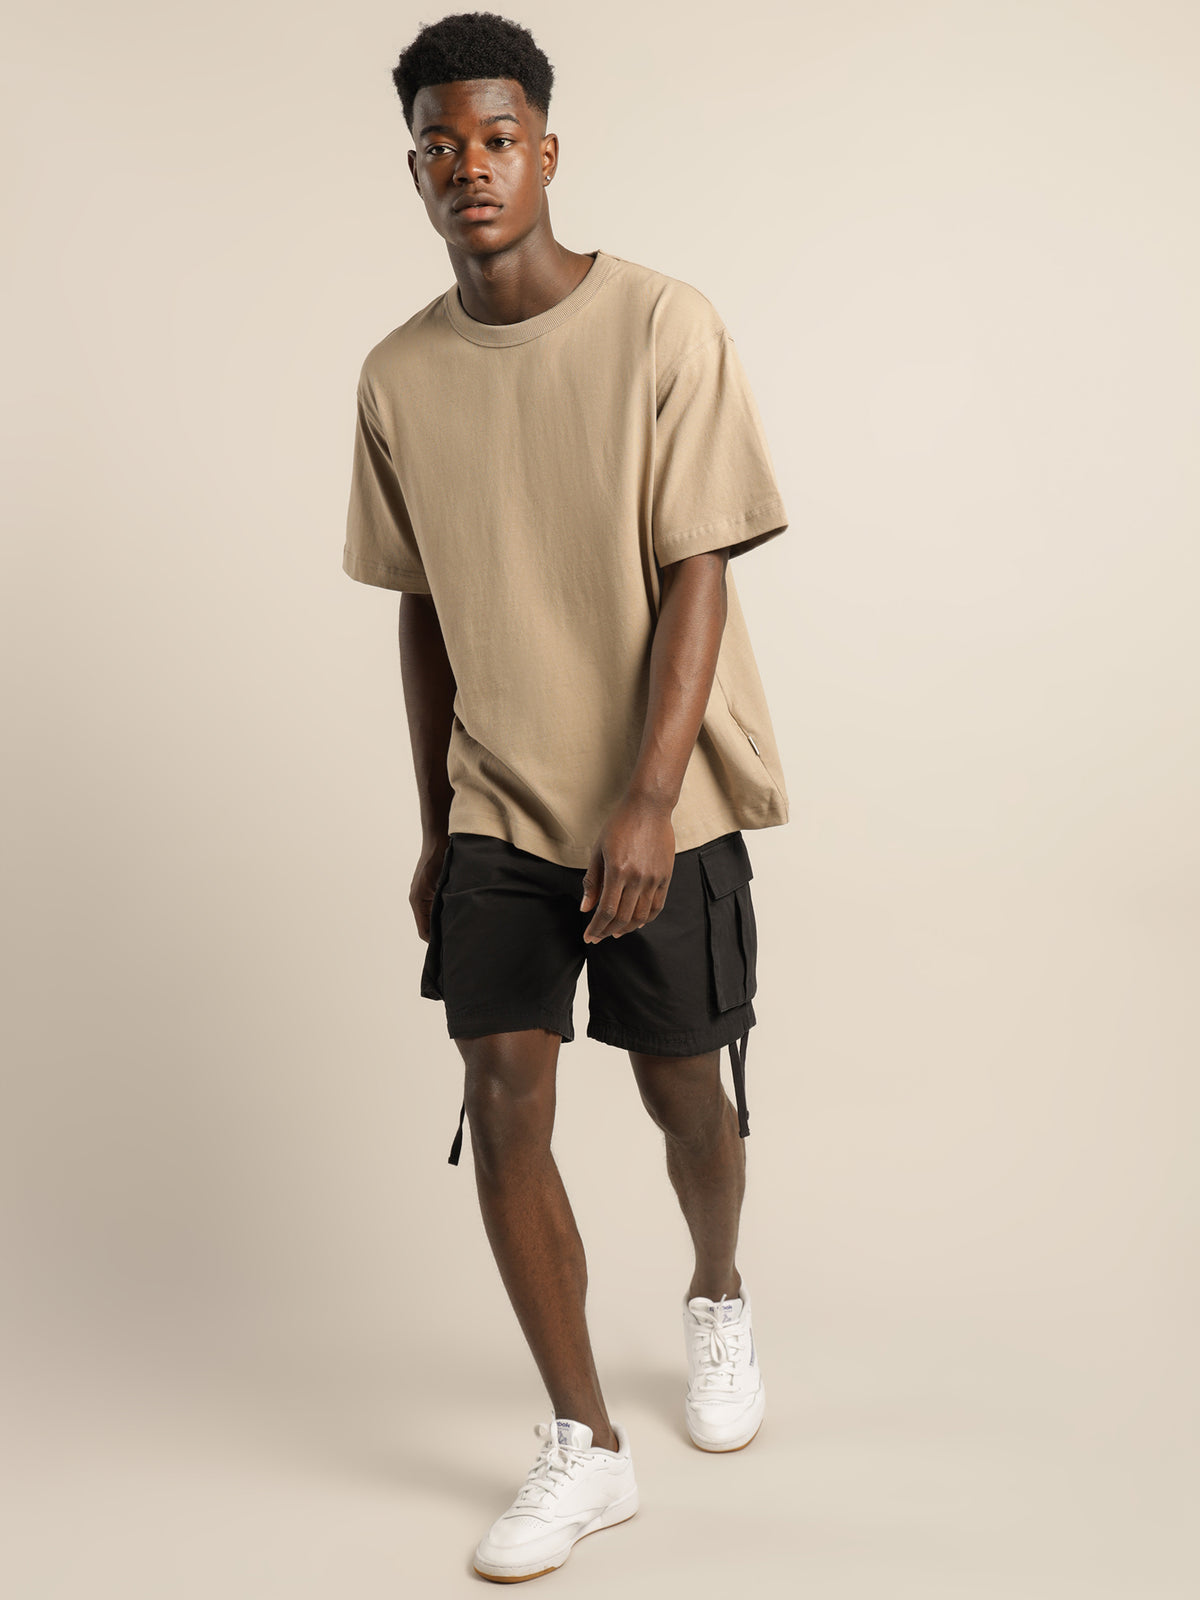 Heavyweight Crew T-Shirt in Beige Taupe